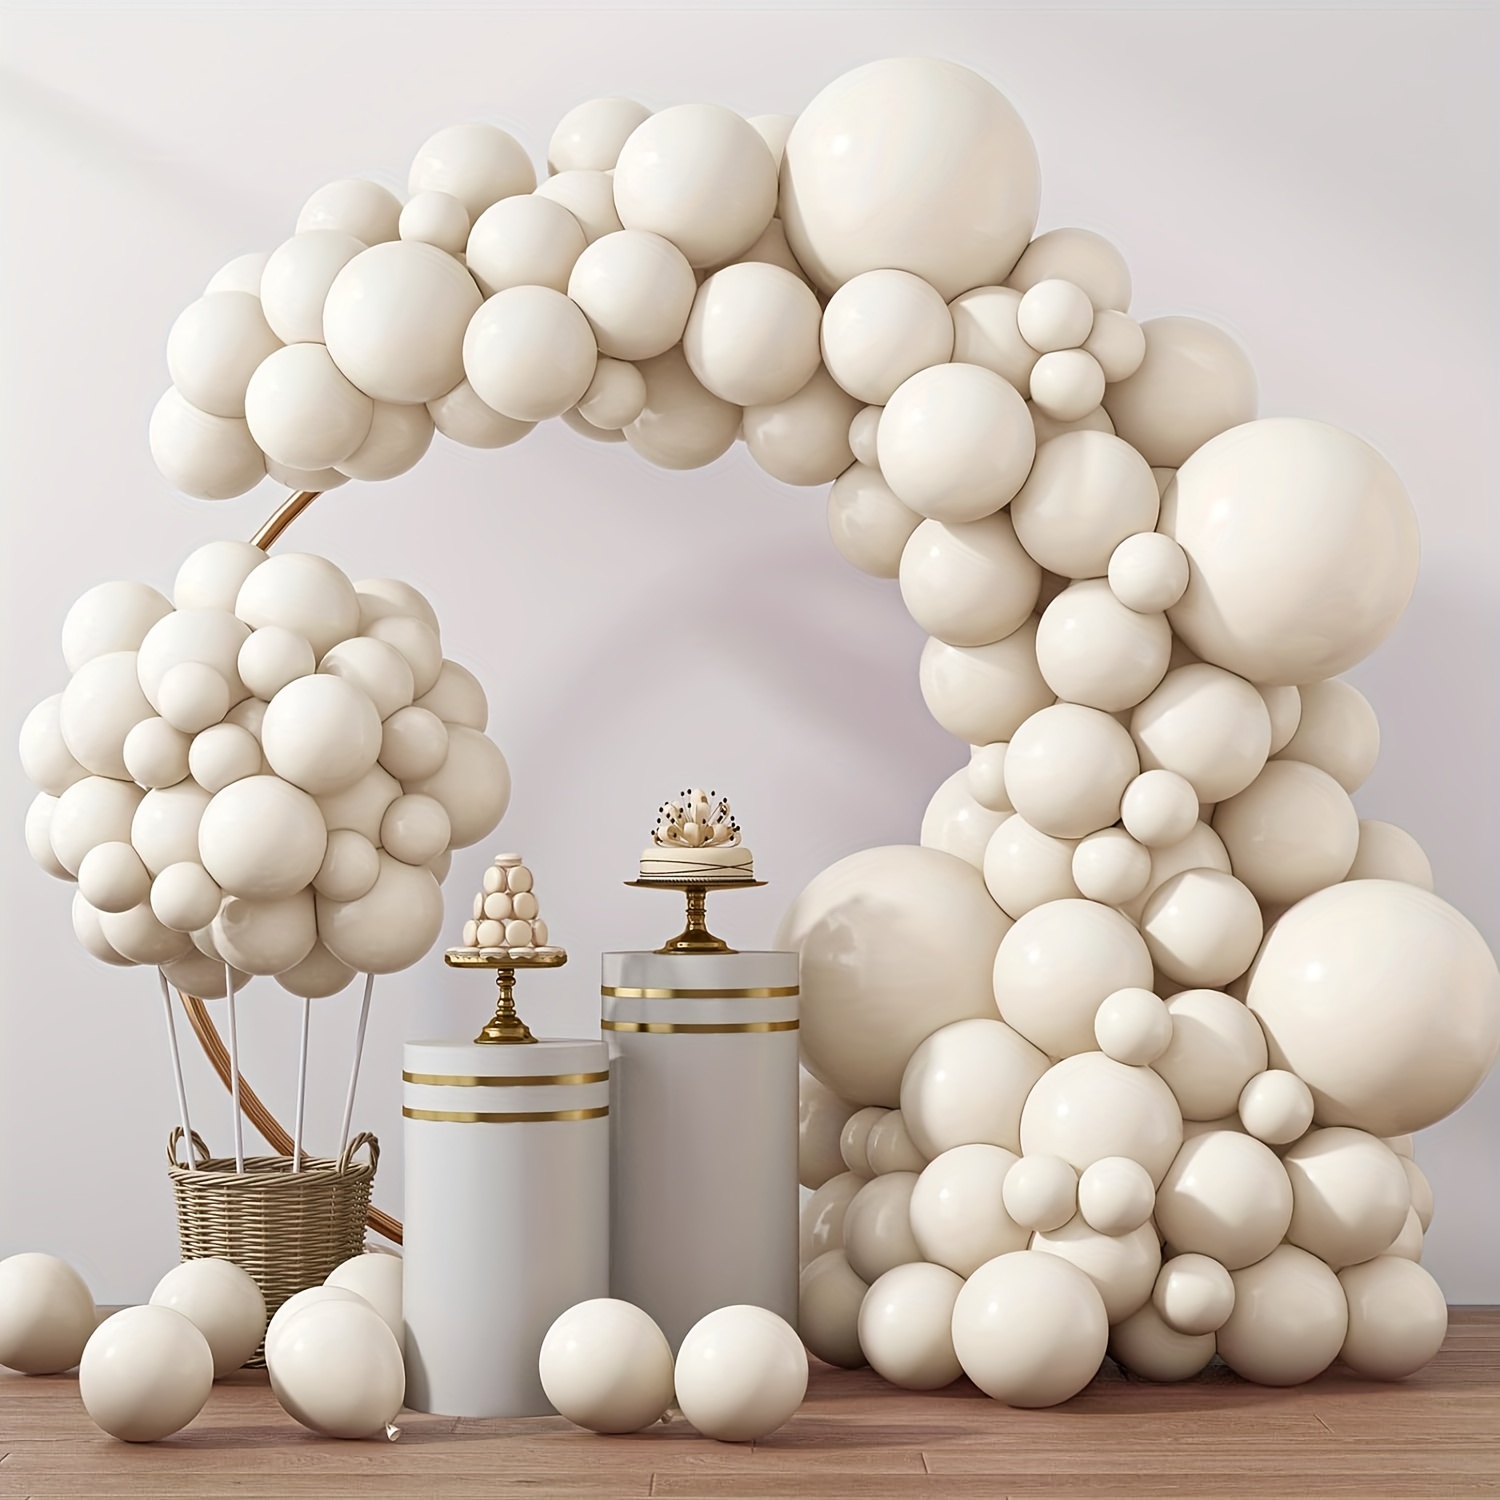 

Sand White Balloon Different Sizes 110pcs 18 12 10 5 Inch Matte White Balloon Garland Arch Kit White Sand Party Latex Balloon For Birthday Easter Party Decorations